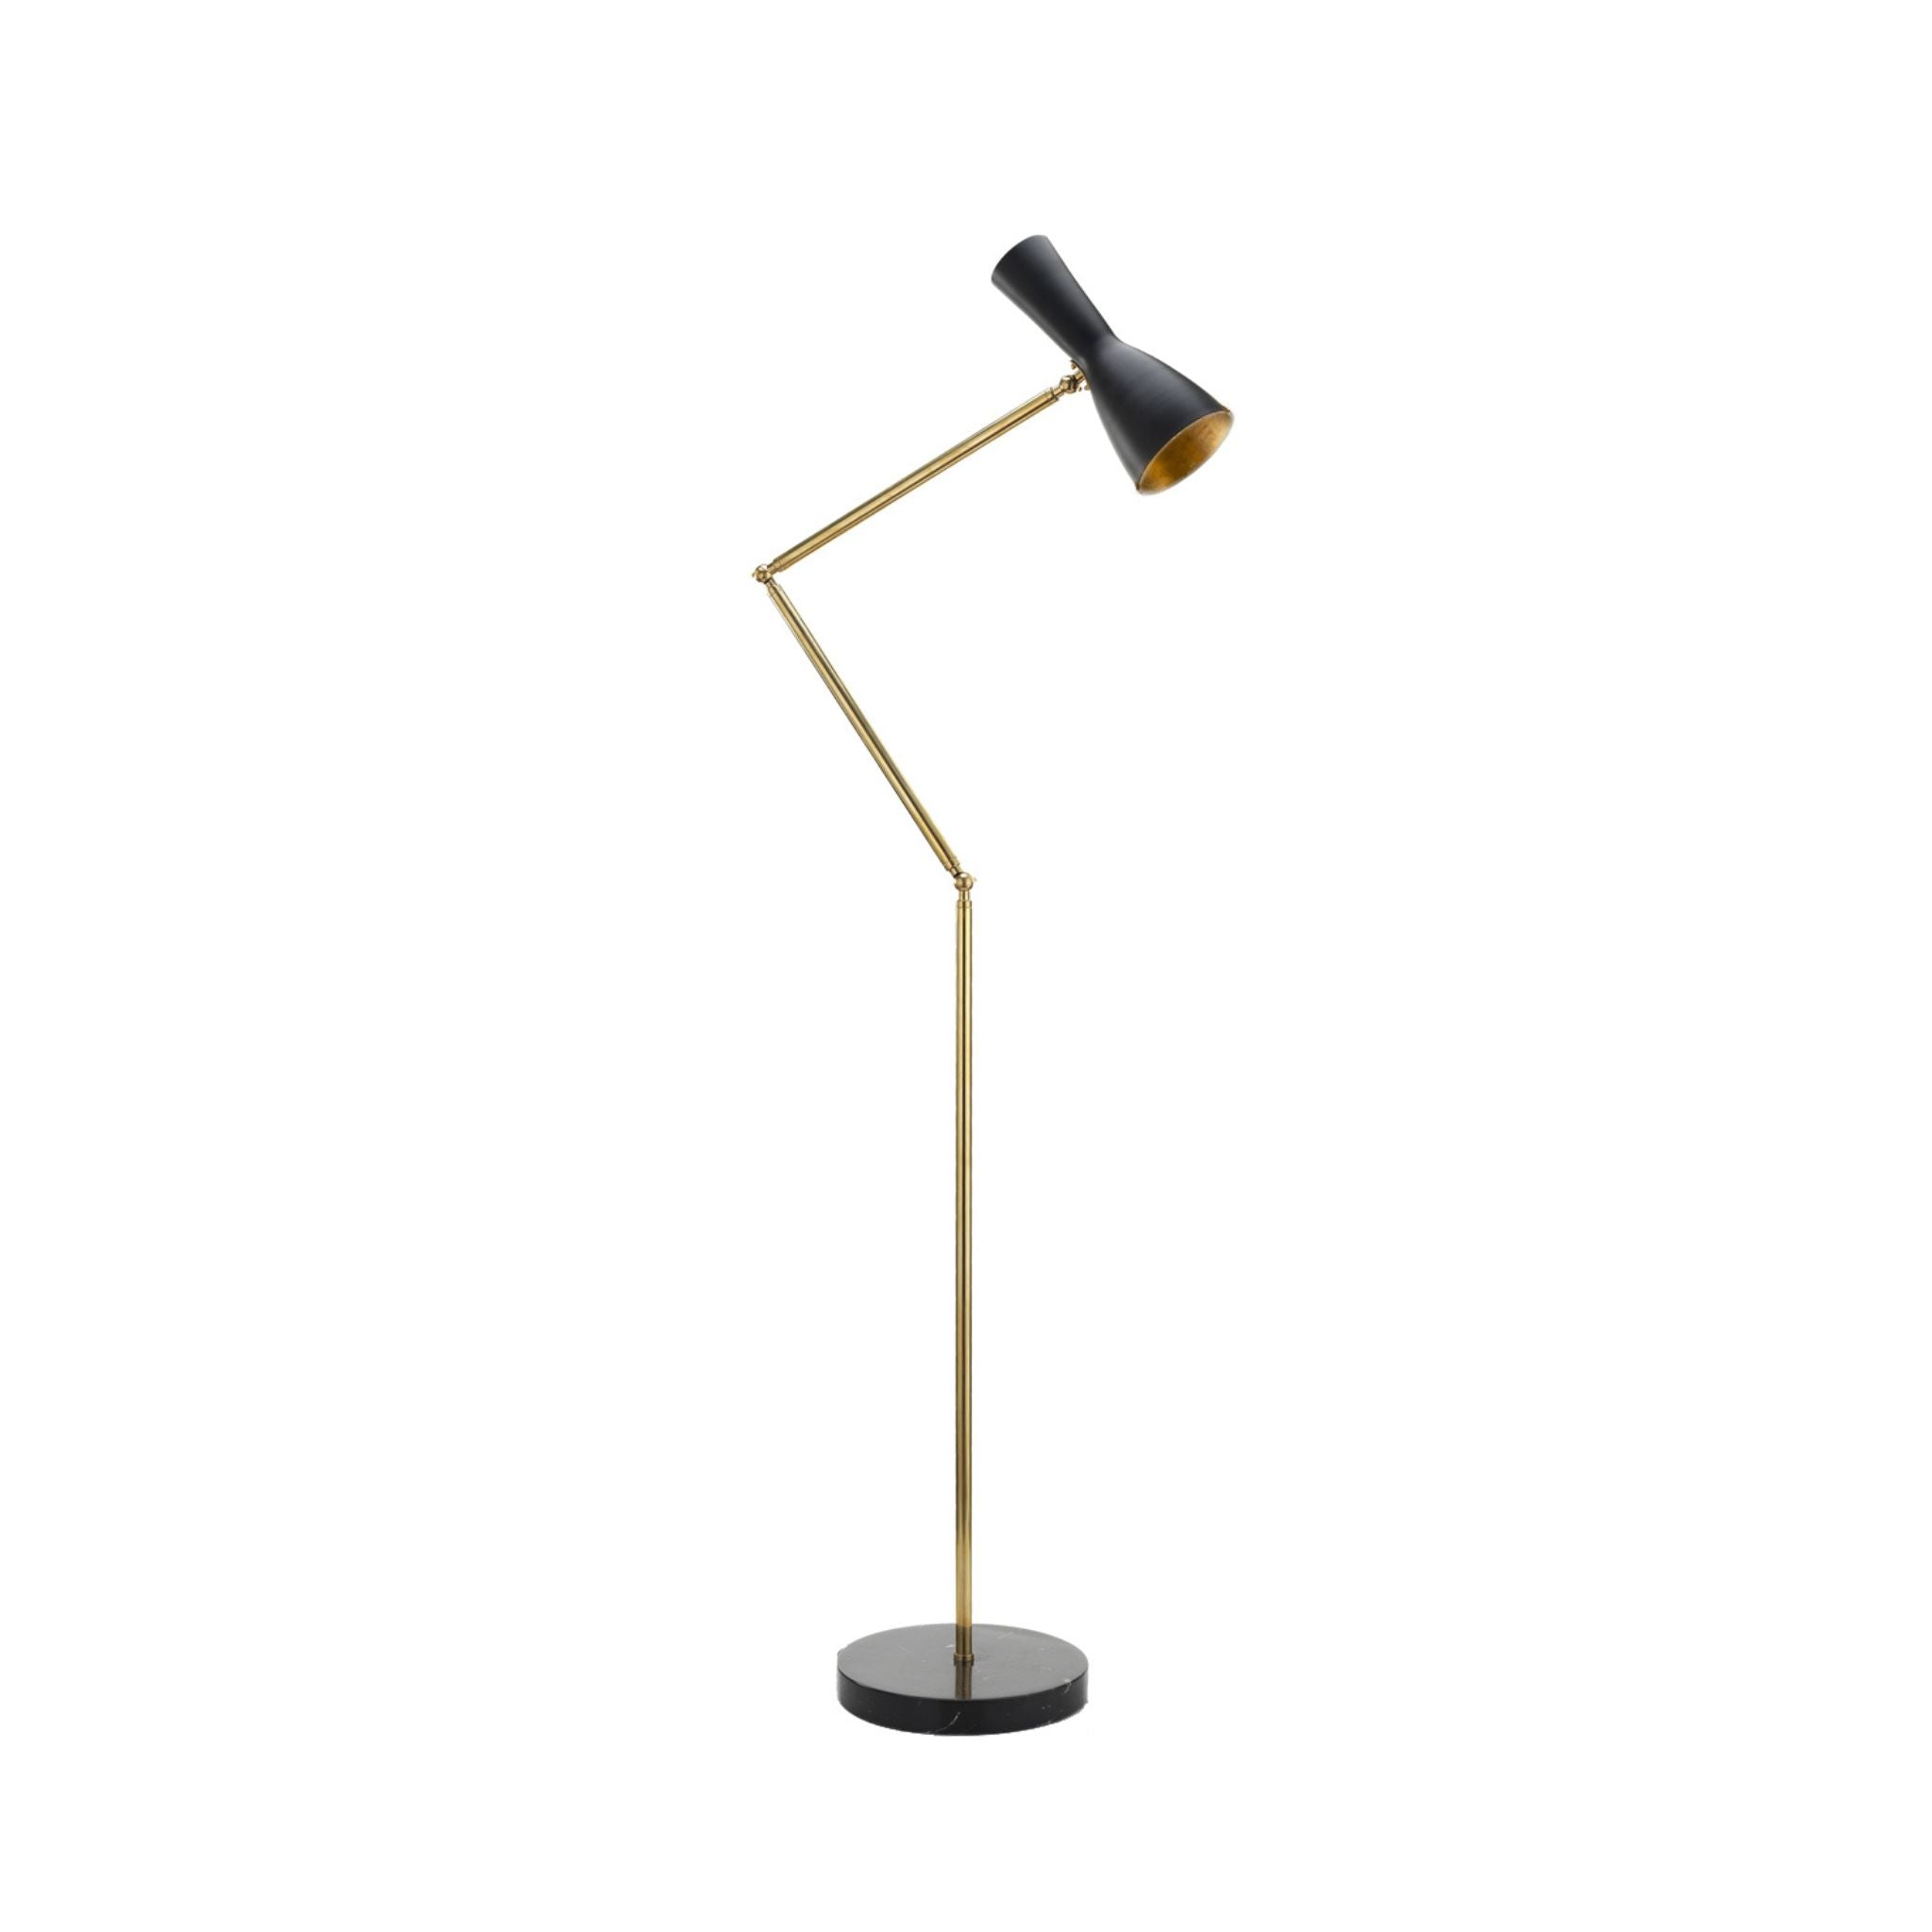 Wormhole jet black brass double joint arm stand floor lamp - ilbronzetto